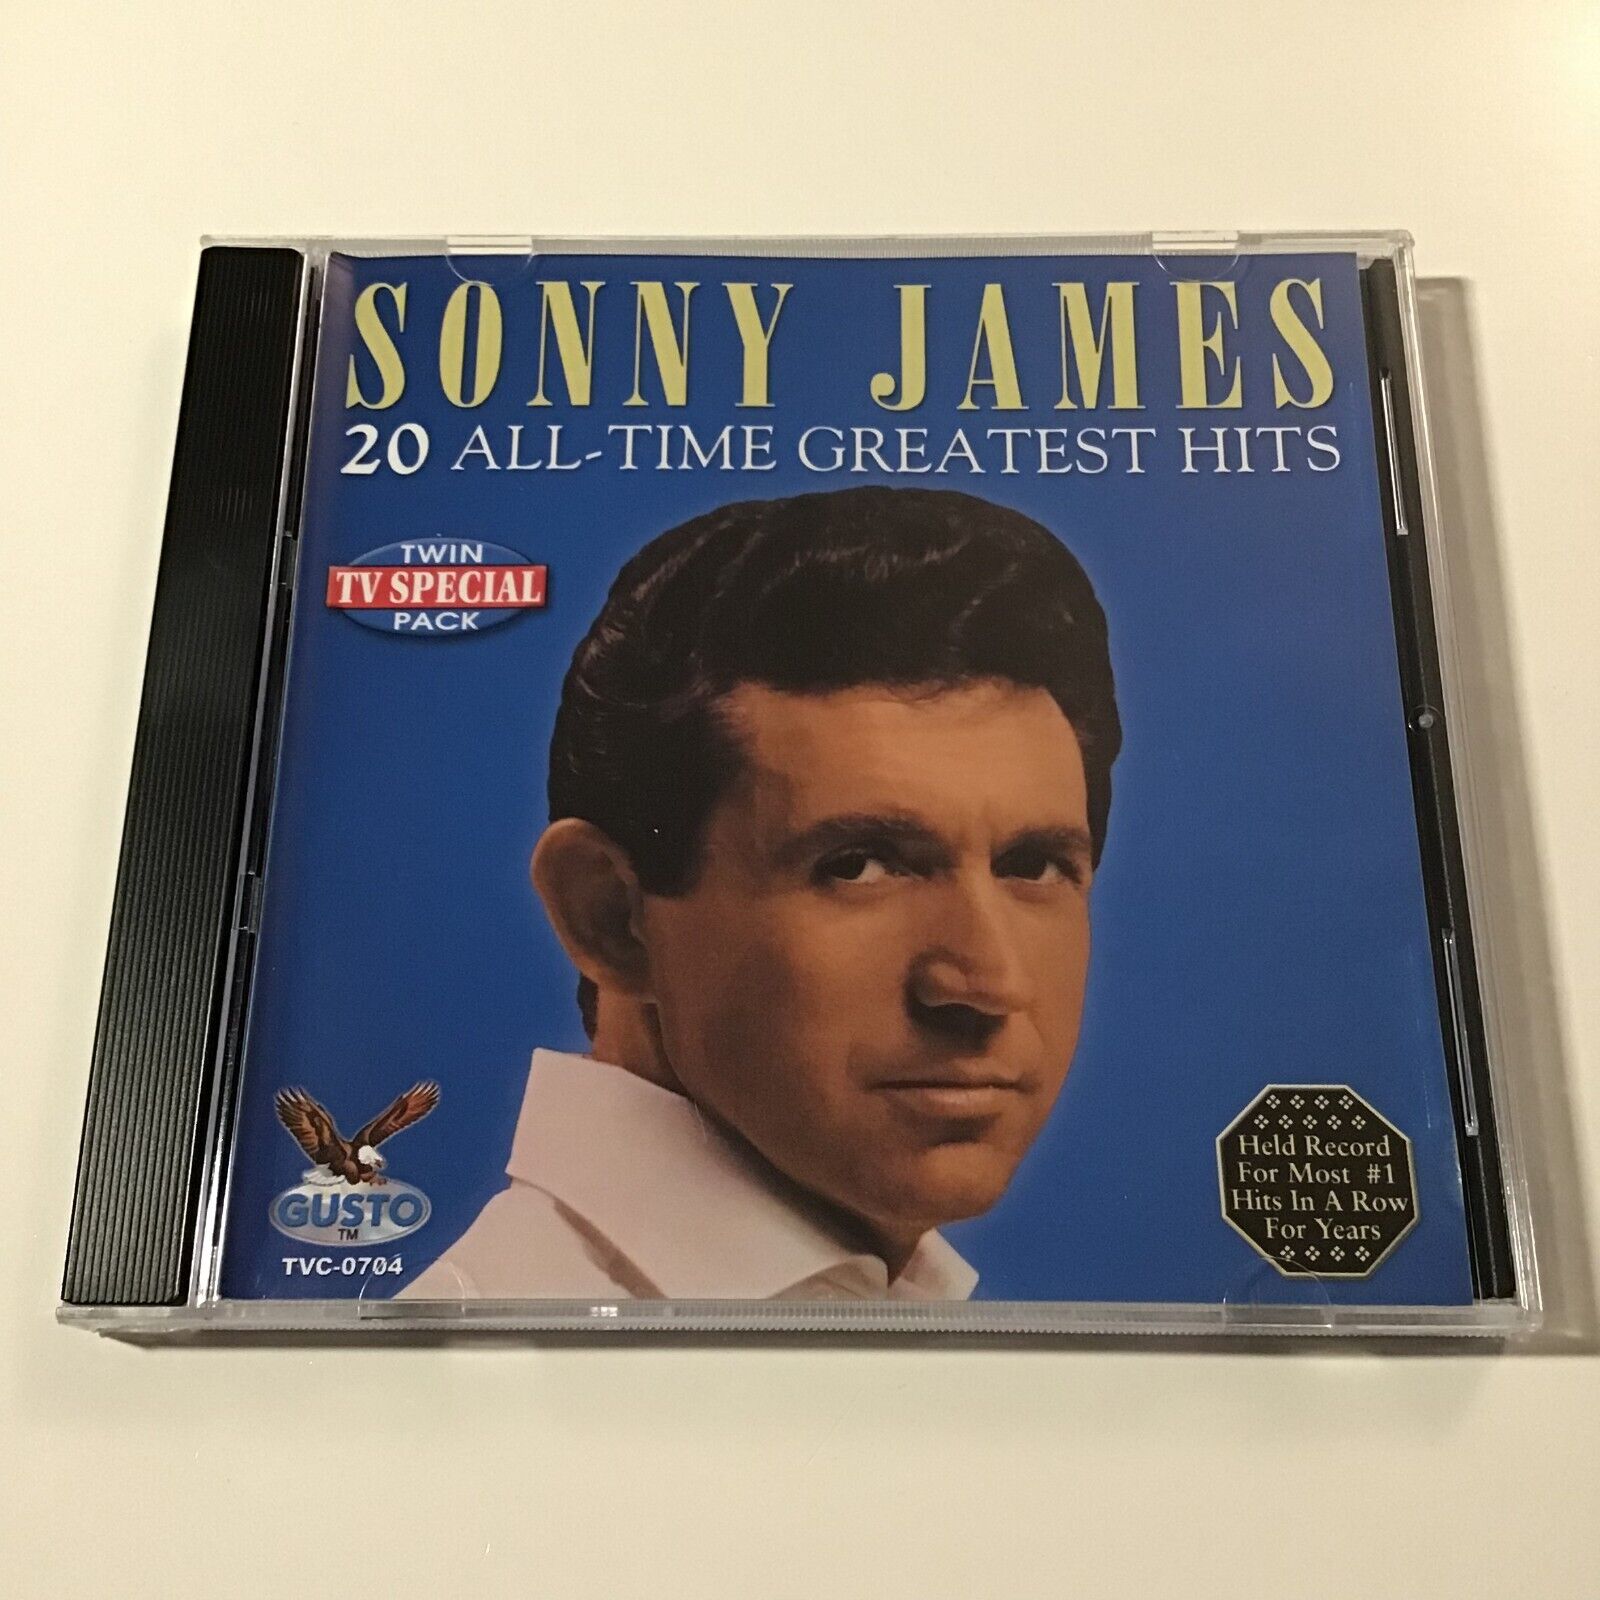 Sonny James - 20 All-Time Greatest Hits (CD, 2014) Country